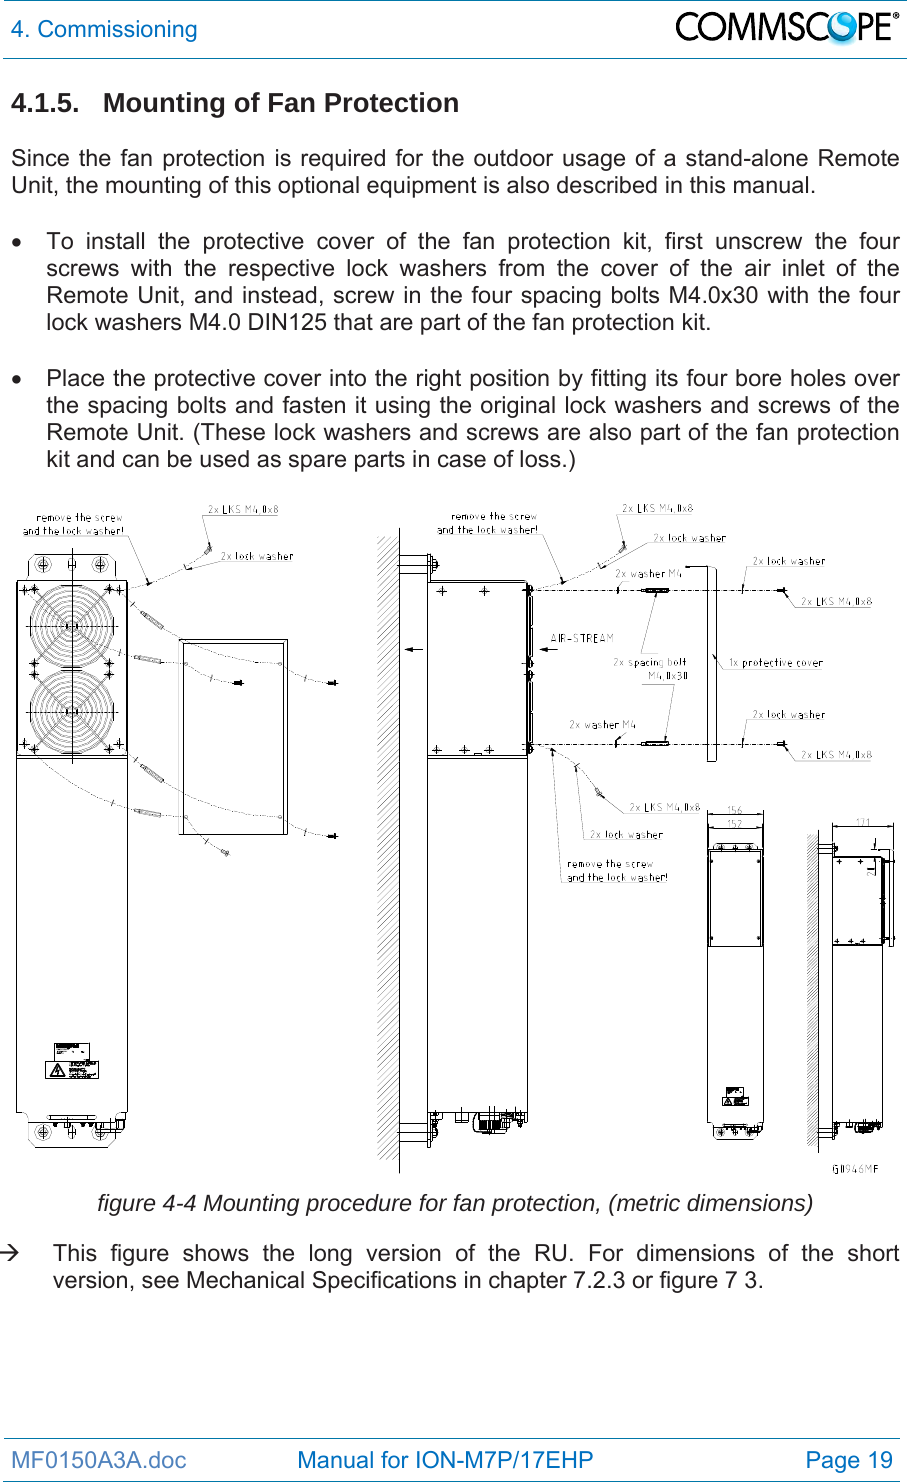 4. Commissioning  MF0150A3A.doc                 Manual for ION-M7P/17EHP  Page 19 4.1.5.  Mounting of Fan Protection  Since the fan protection is required for the outdoor usage of a stand-alone Remote Unit, the mounting of this optional equipment is also described in this manual.    To install the protective cover of the fan protection kit, first unscrew the four screws with the respective lock washers from the cover of the air inlet of the Remote Unit, and instead, screw in the four spacing bolts M4.0x30 with the four lock washers M4.0 DIN125 that are part of the fan protection kit.    Place the protective cover into the right position by fitting its four bore holes over the spacing bolts and fasten it using the original lock washers and screws of the Remote Unit. (These lock washers and screws are also part of the fan protection kit and can be used as spare parts in case of loss.)   figure 4-4 Mounting procedure for fan protection, (metric dimensions)   This figure shows the long version of the RU. For dimensions of the short version, see Mechanical Specifications in chapter 7.2.3 or figure 7 3. 